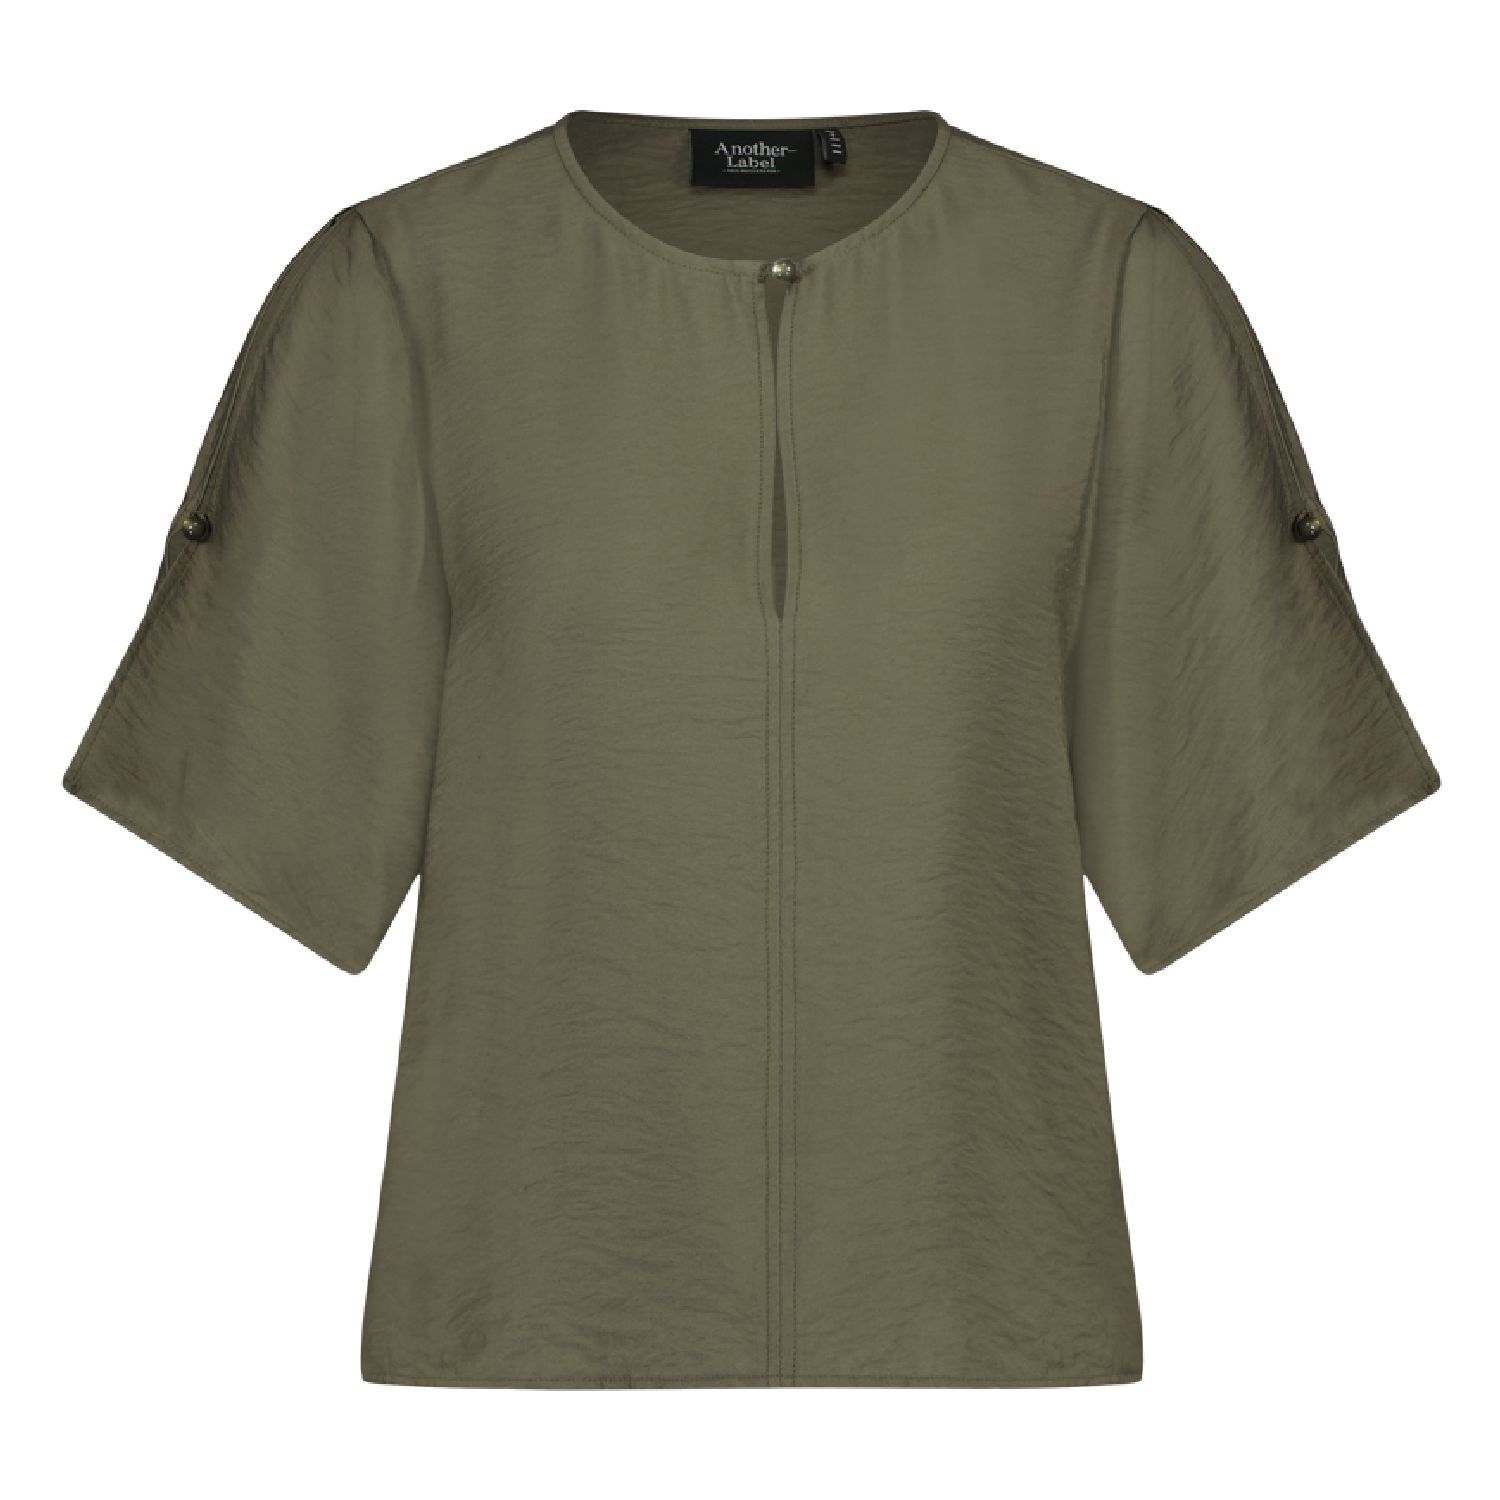 Louise top s/s Dusty Green | Another Label